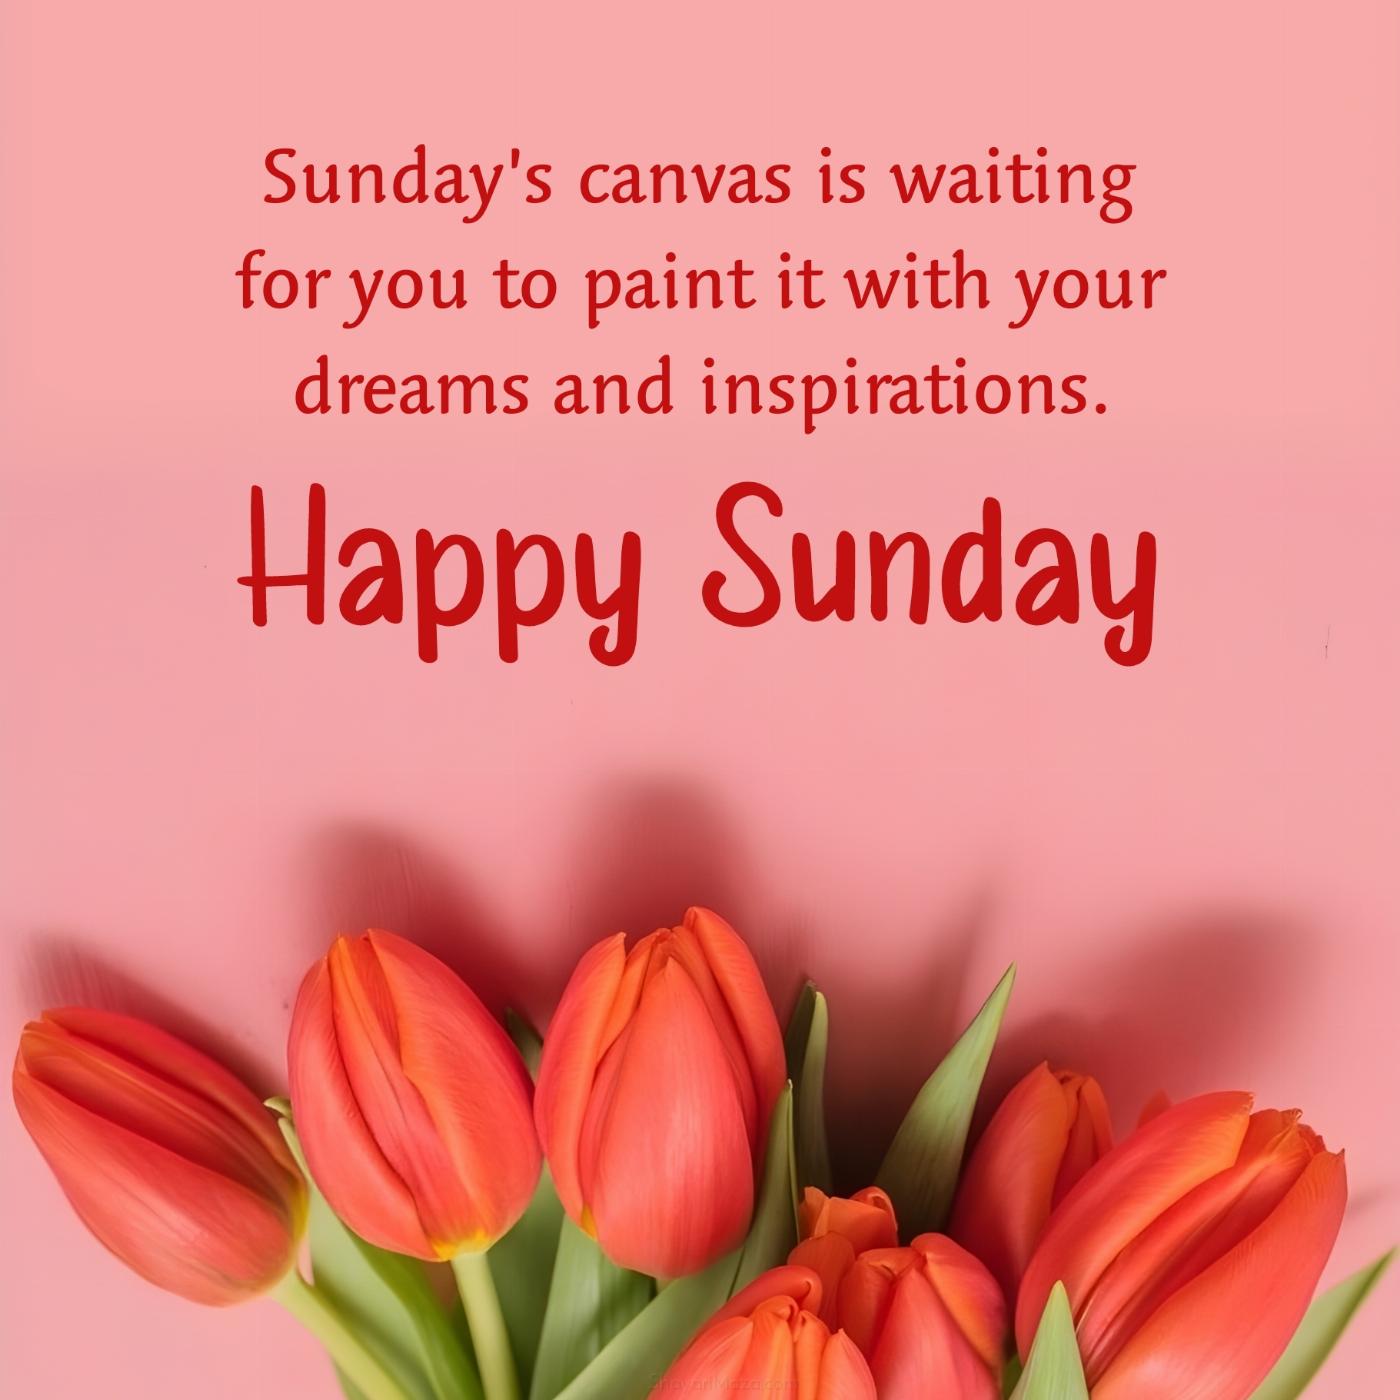 Sundays canvas is waiting for you to paint it with your dreams